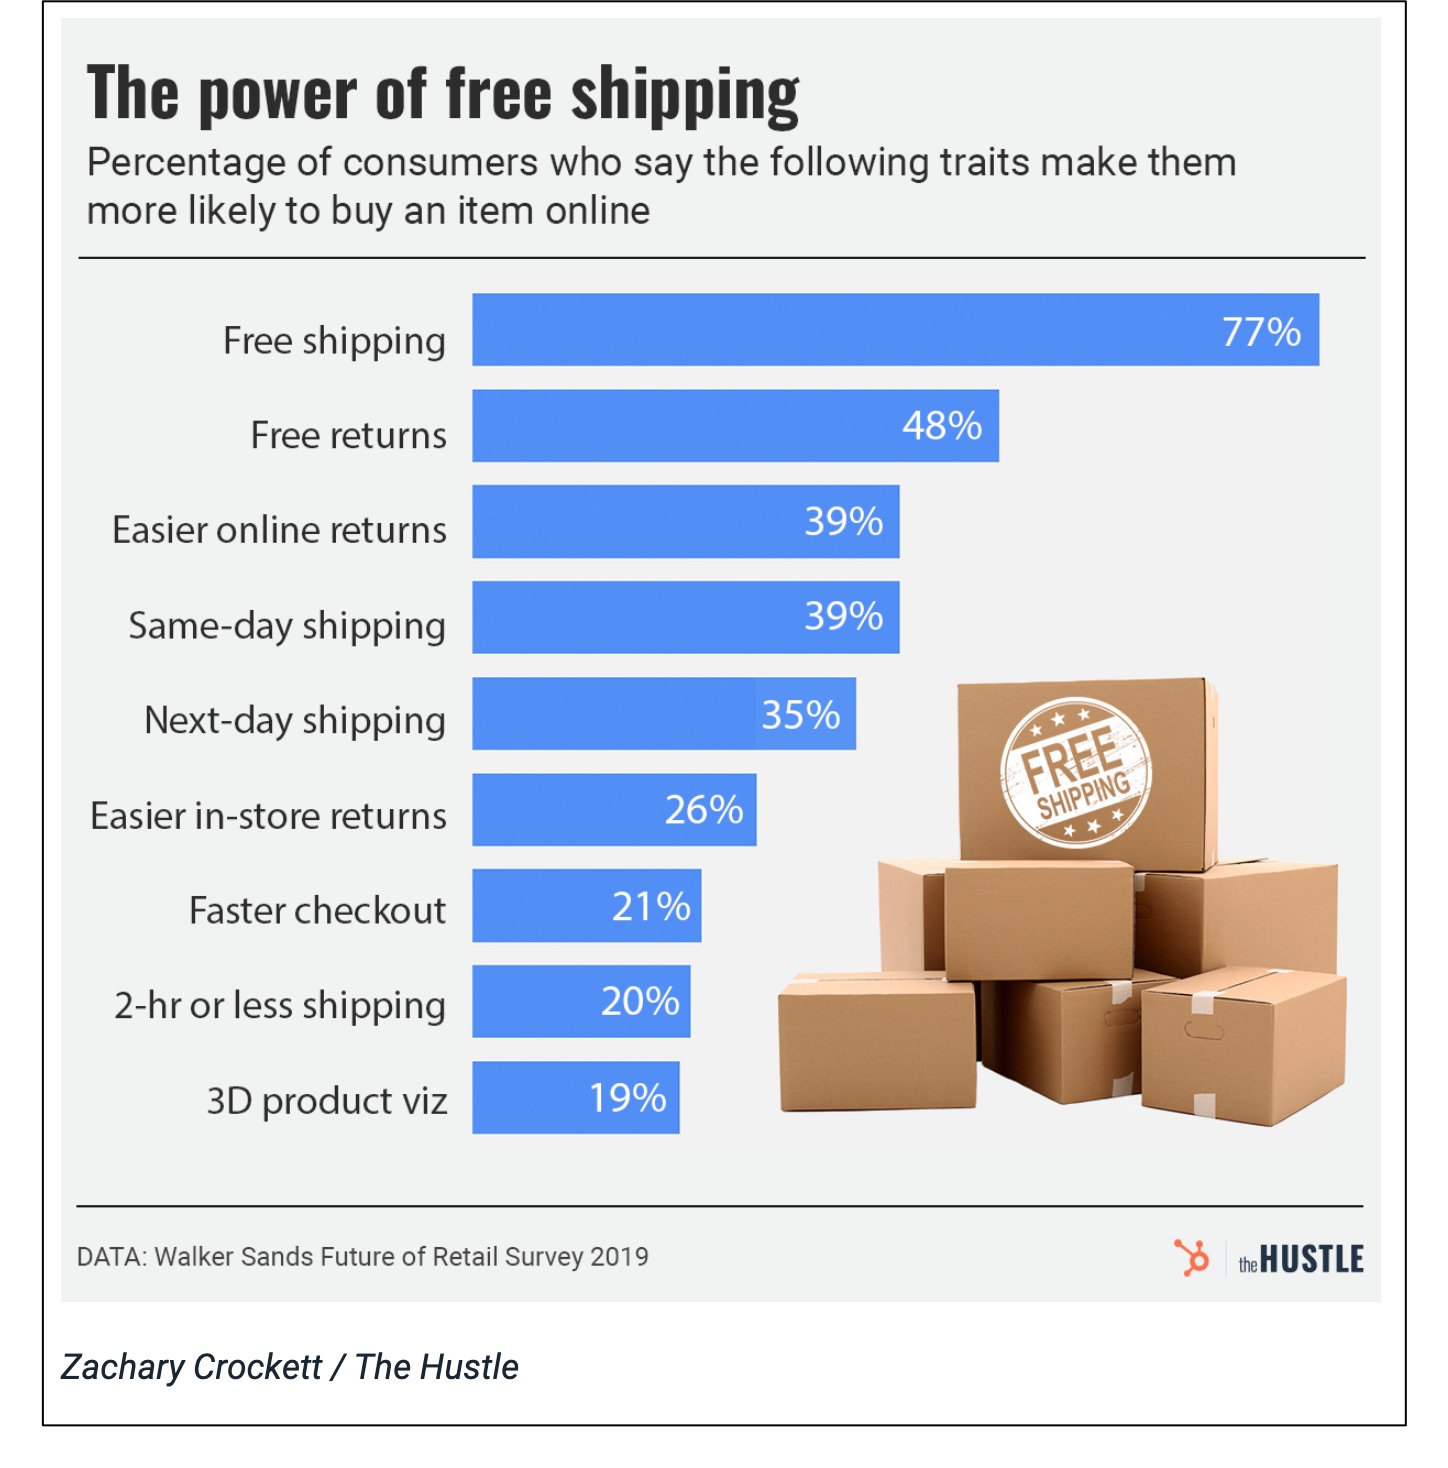 How Free Shipping and Freww Chocolates are Similar